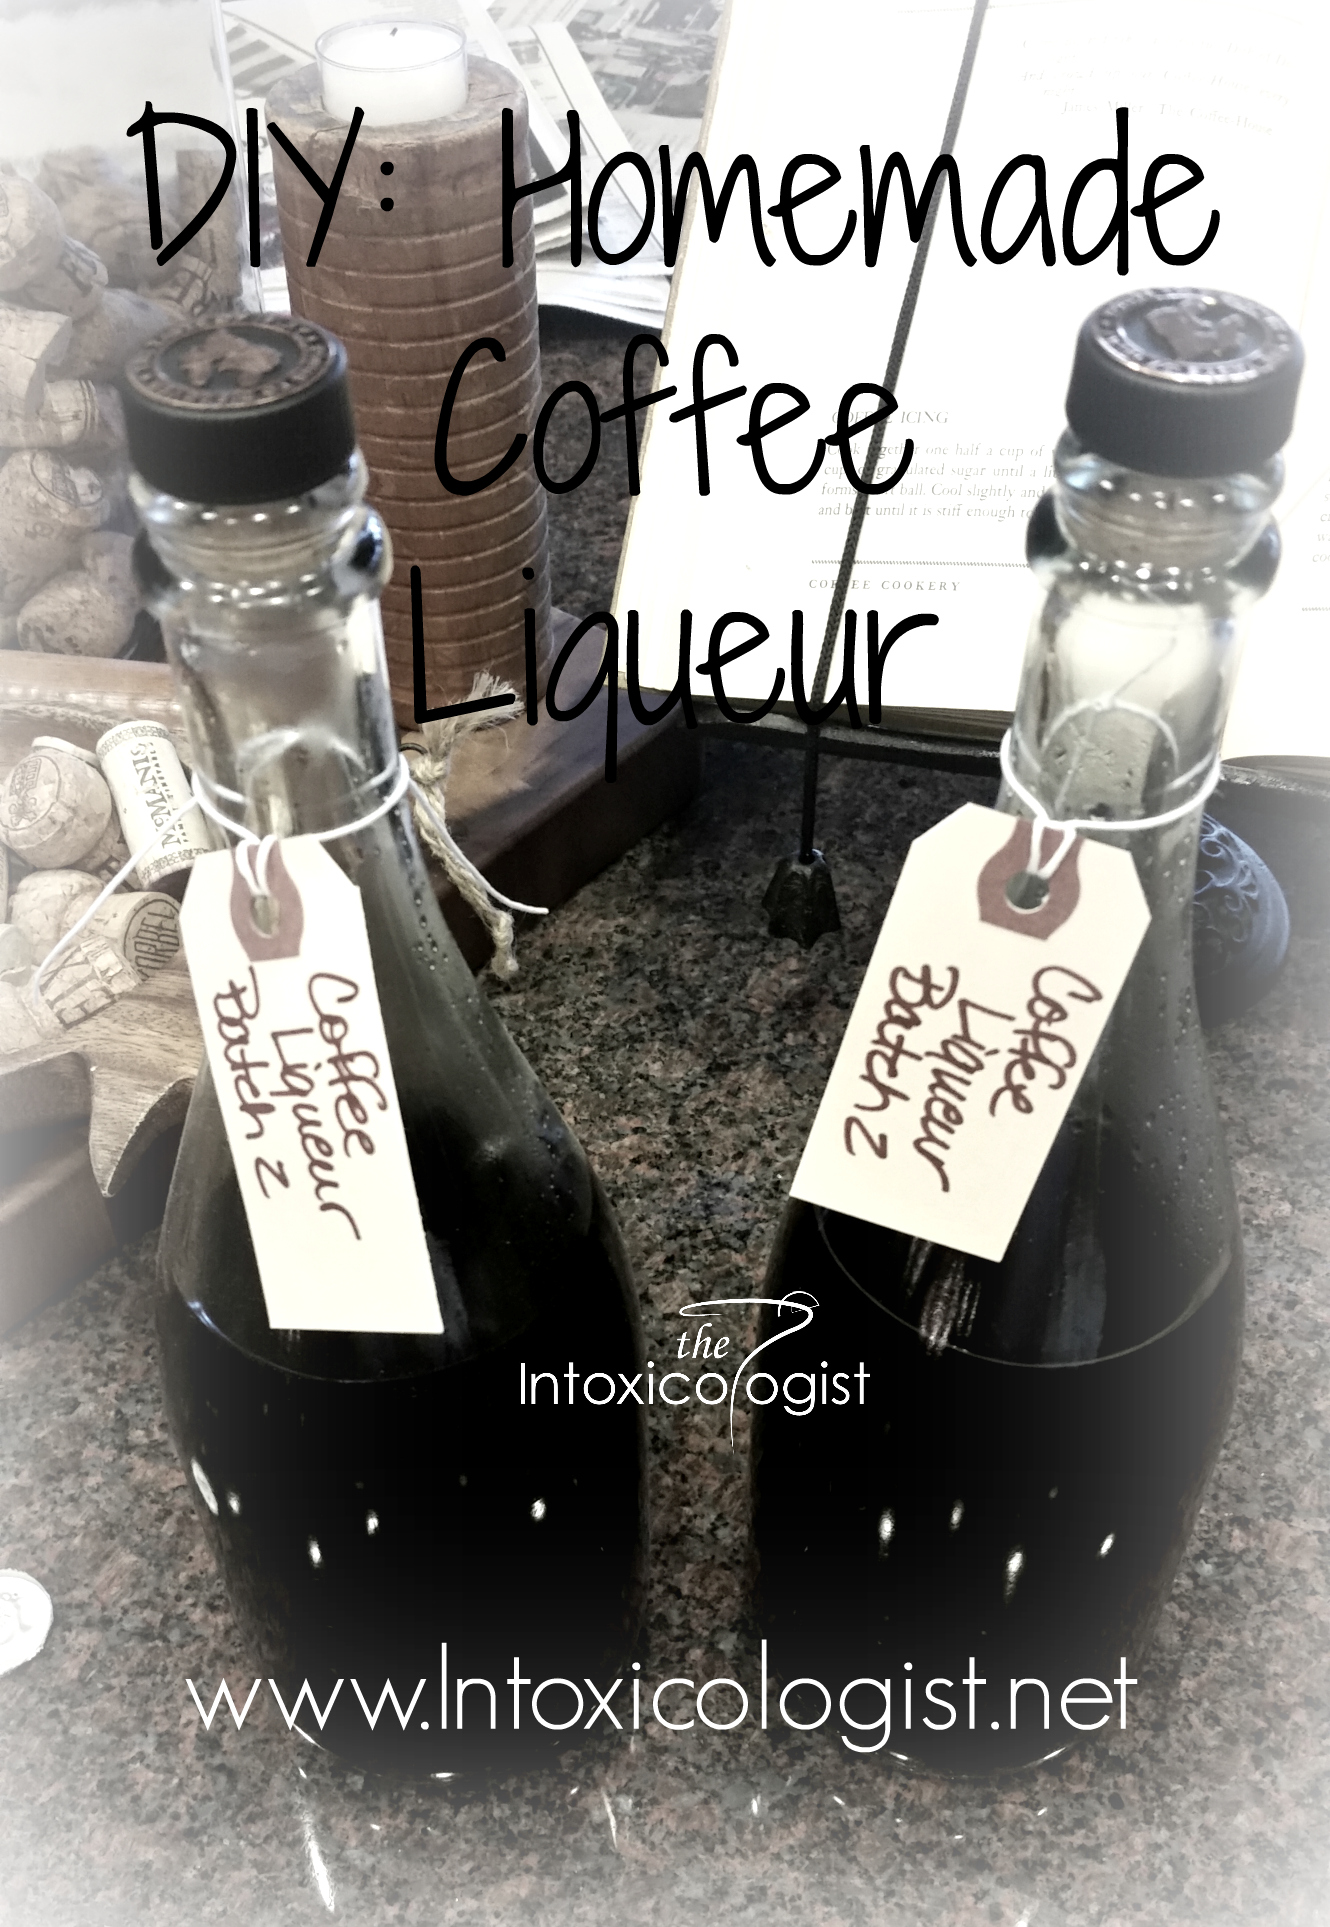 National Kahlua Day is February 27. Try your hand at making your own homemade coffee liqueur and try it in your favorite recipe.